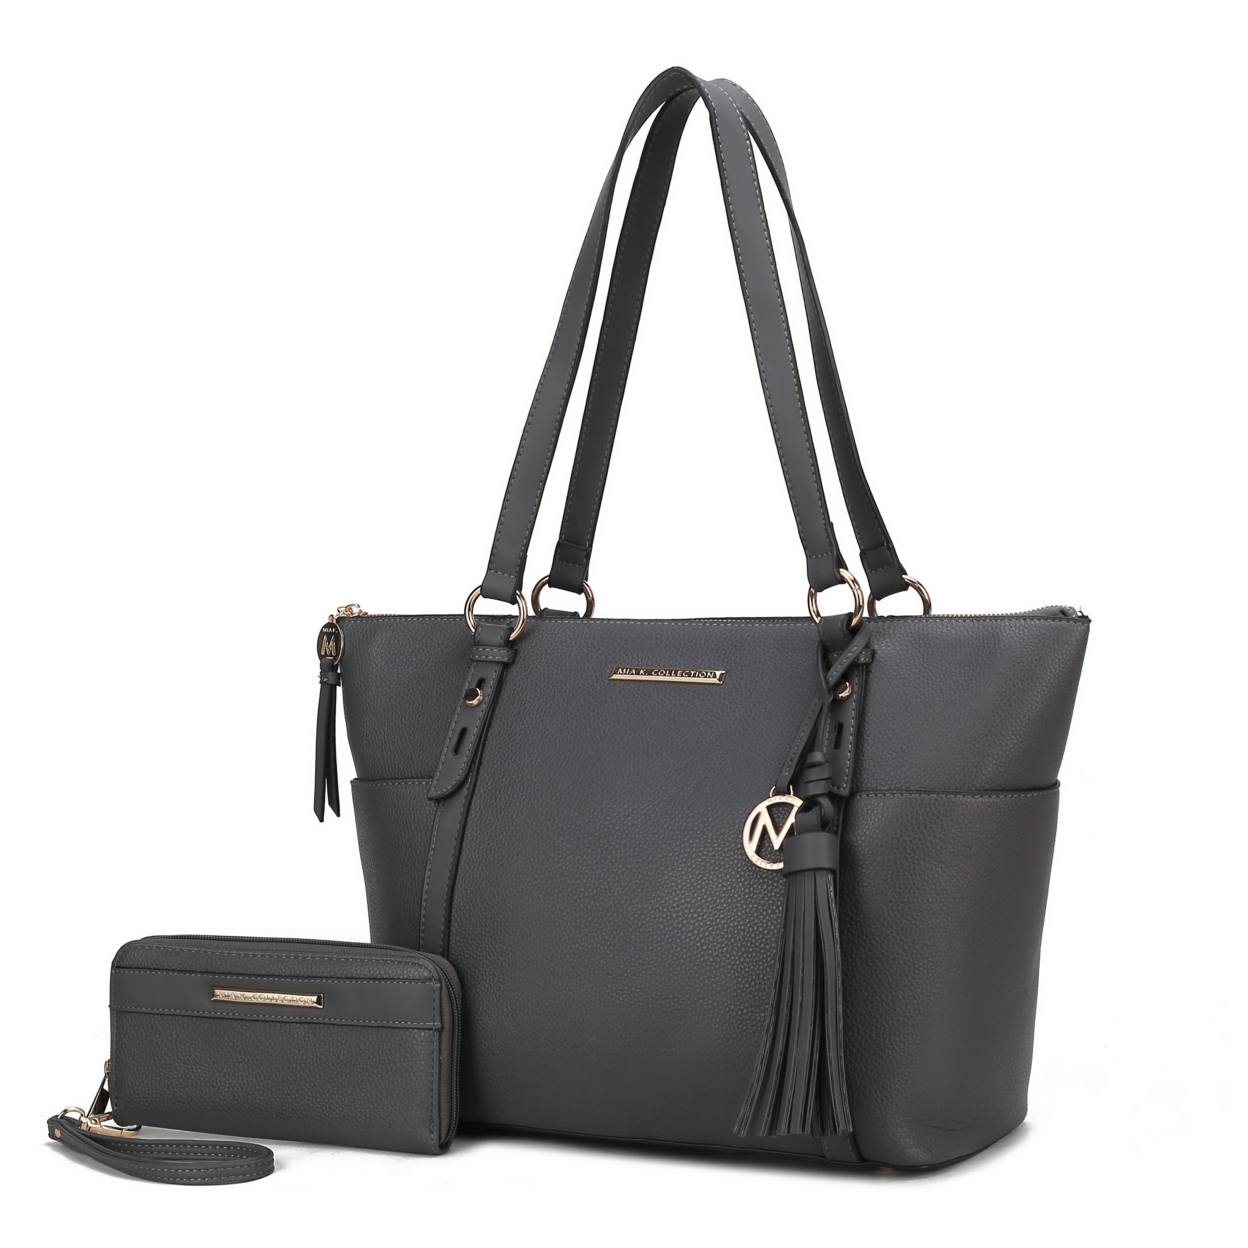 MKF Collection Gloria Vegan Leather Women's Tote Bag By Mia K With Wallet -2 Pieces - Charcoal